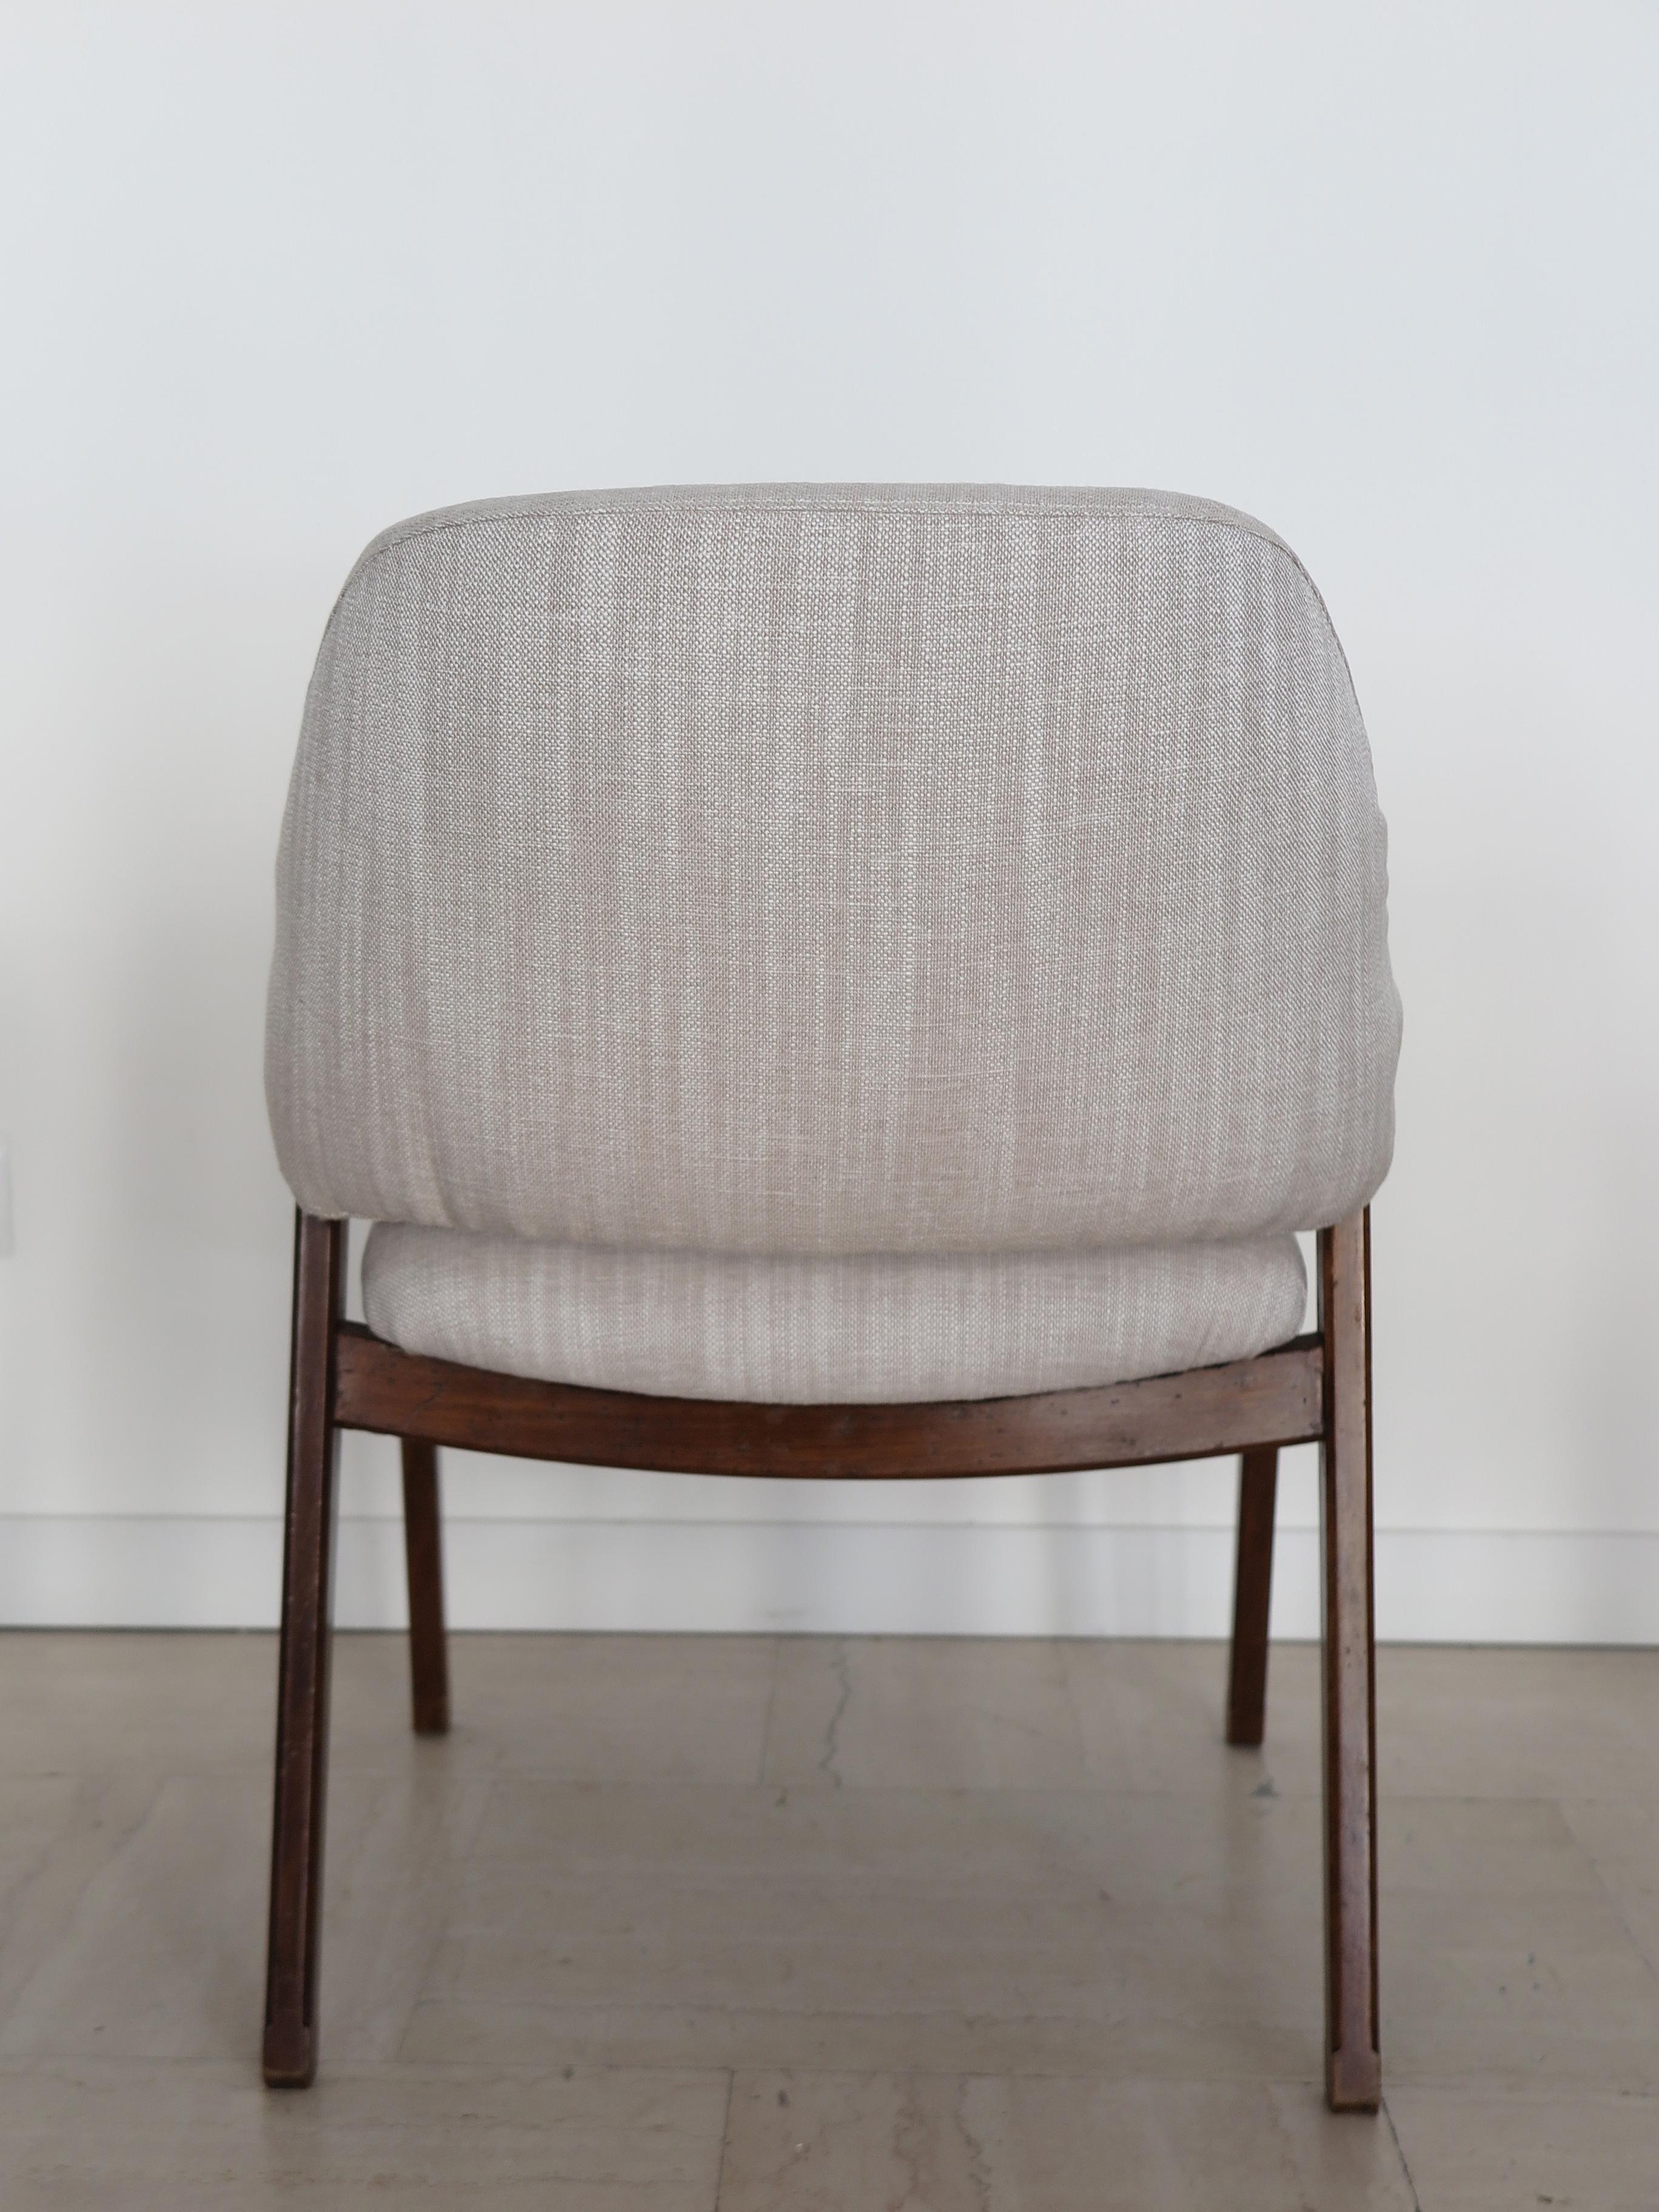 Ico Parisi Italian Midcentury Fabric Wood Armchair Model 814 for Cassina, 1960s For Sale 2